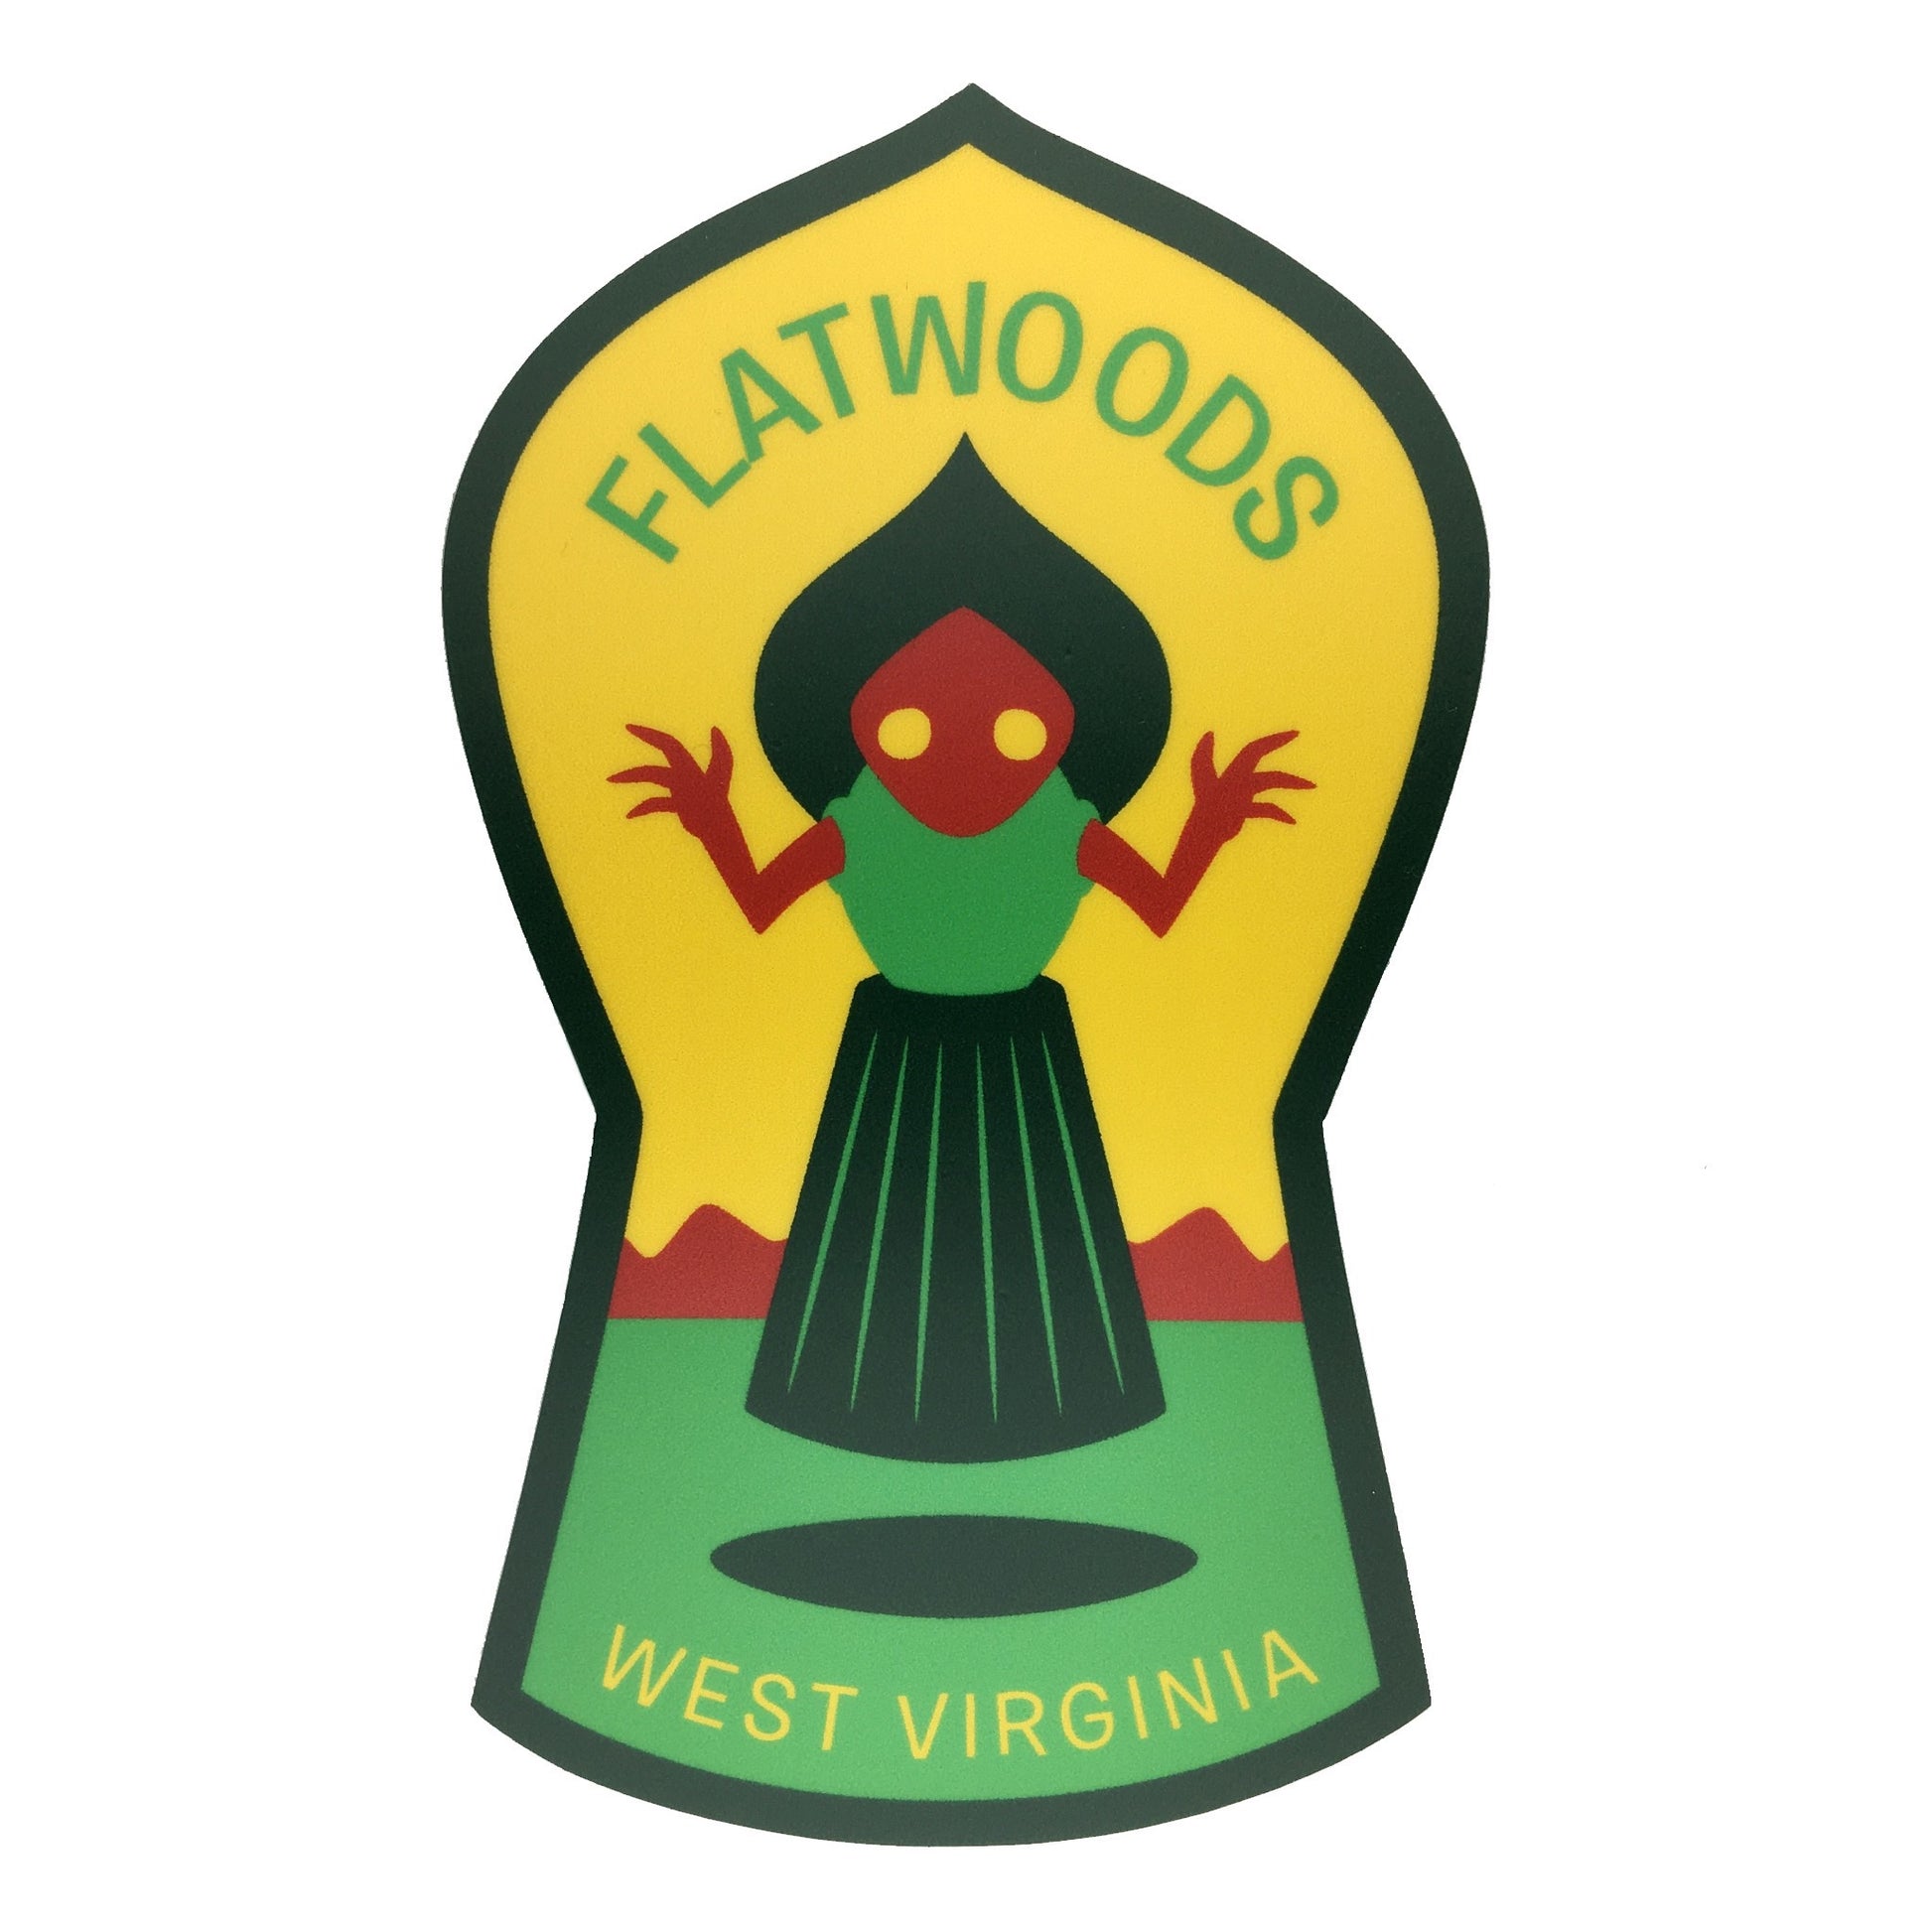 Flatwoods, West Virginia travel sticker by Monsterologist